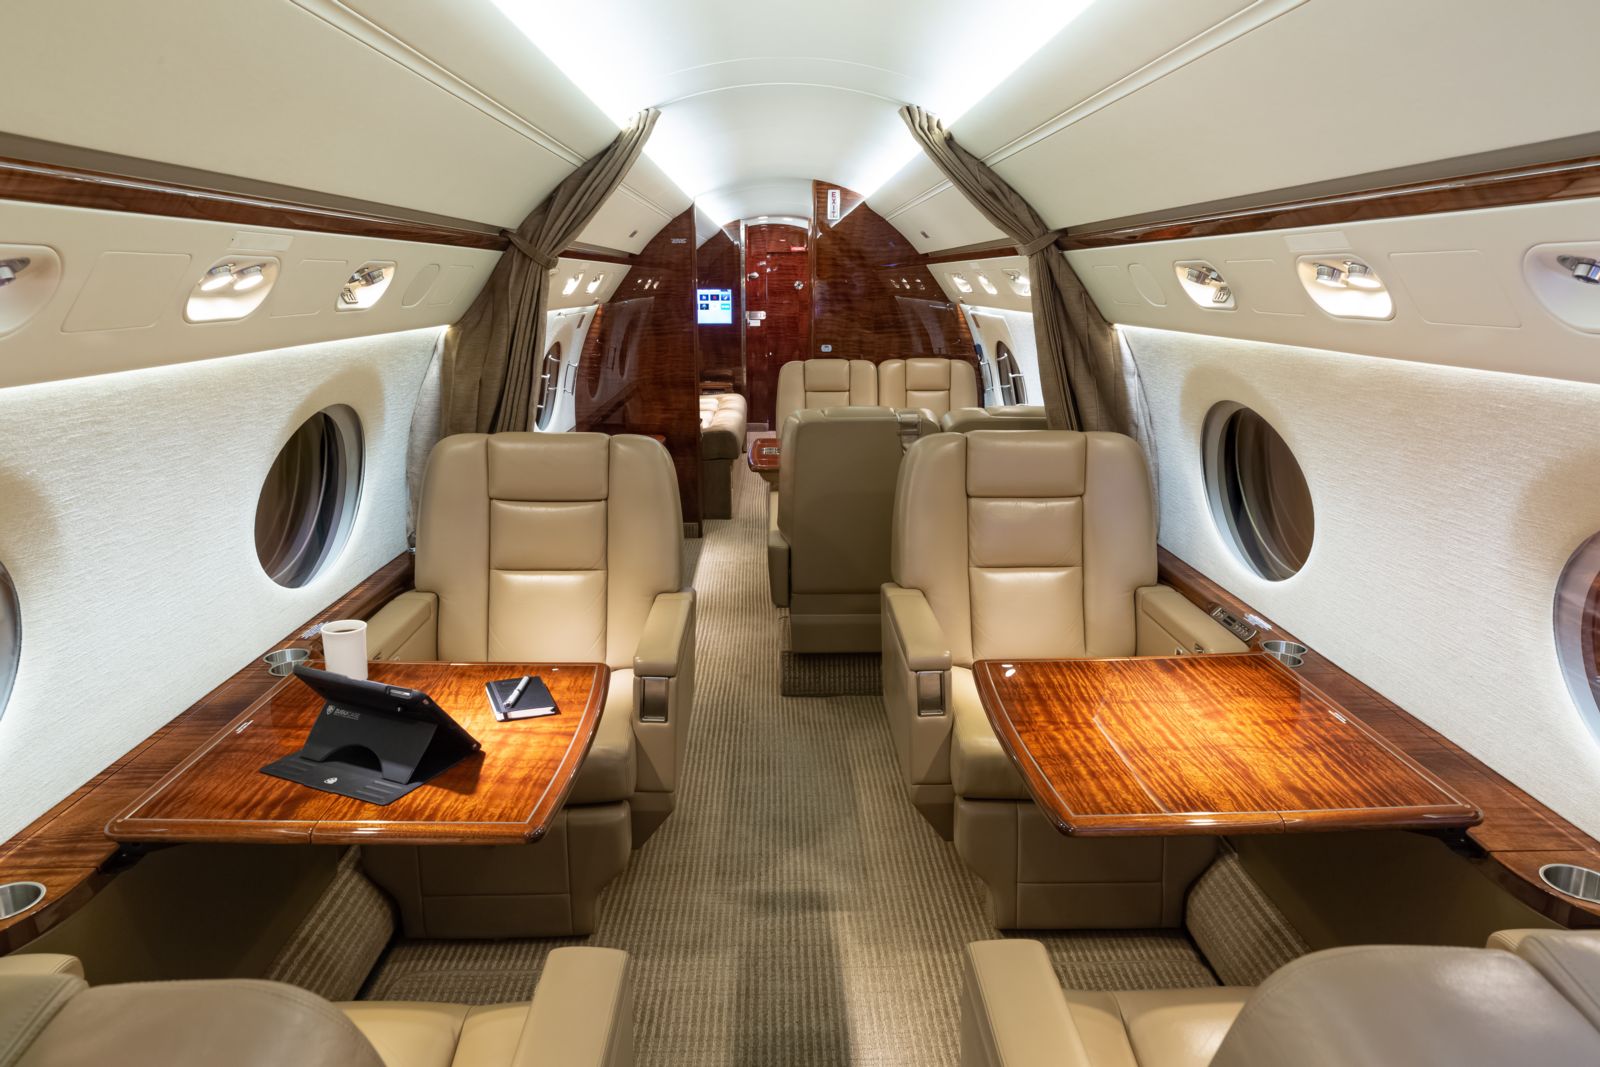 Gulfstream G550  S/N 5441 for sale | gallery image: /userfiles/images/G550_sn5441/bfp_1111.jpg